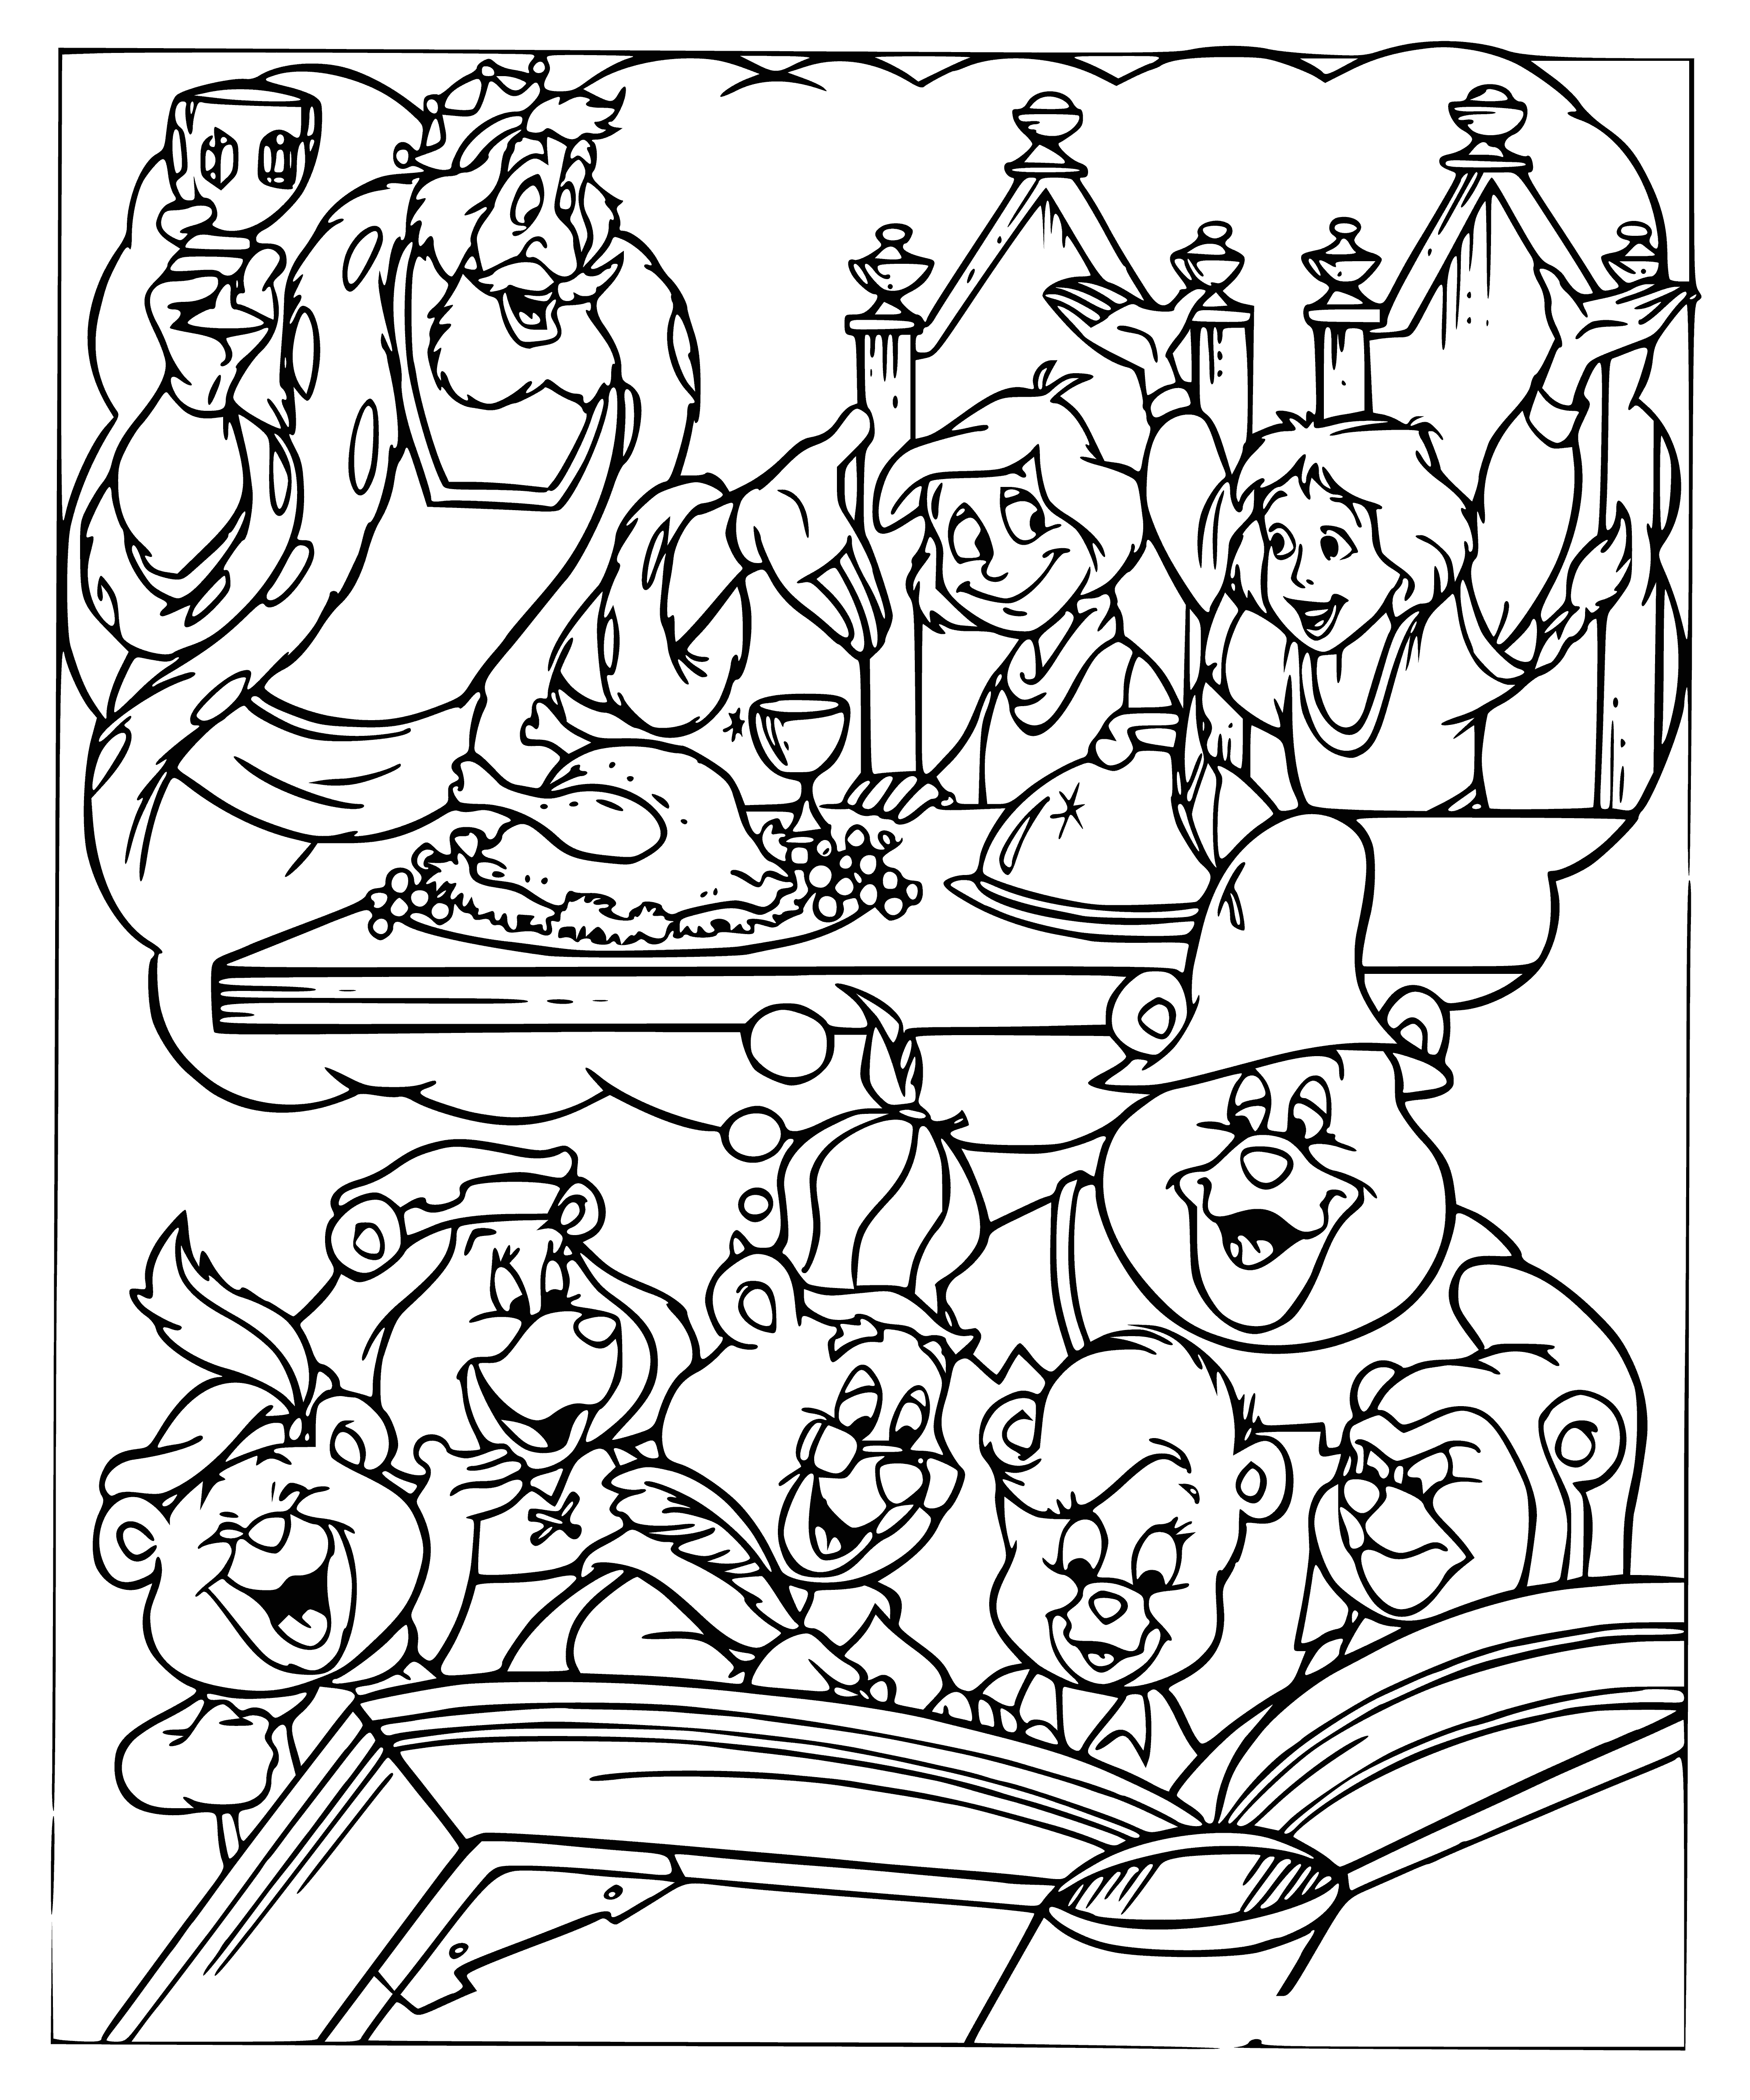 Book of fairy tales coloring page